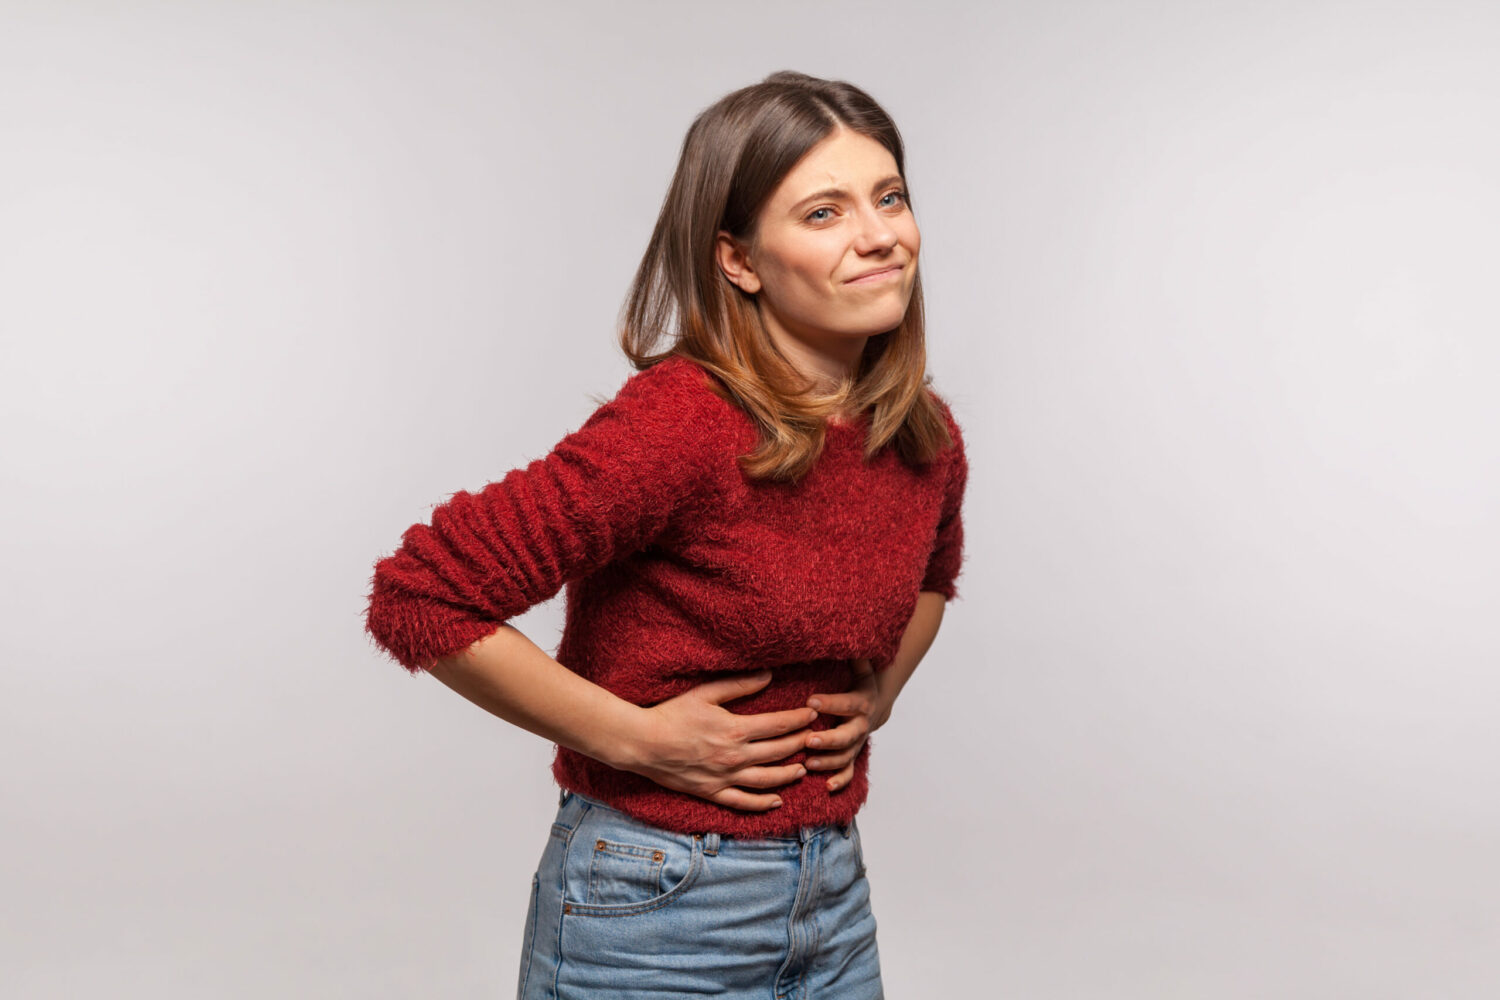 Girl in shaggy sweater touching belly, grimacing from stomach ache, severe abdominal distress, symptoms of constipation, indigestion, gastrointestinal disorder. studio shot isolated on gray background